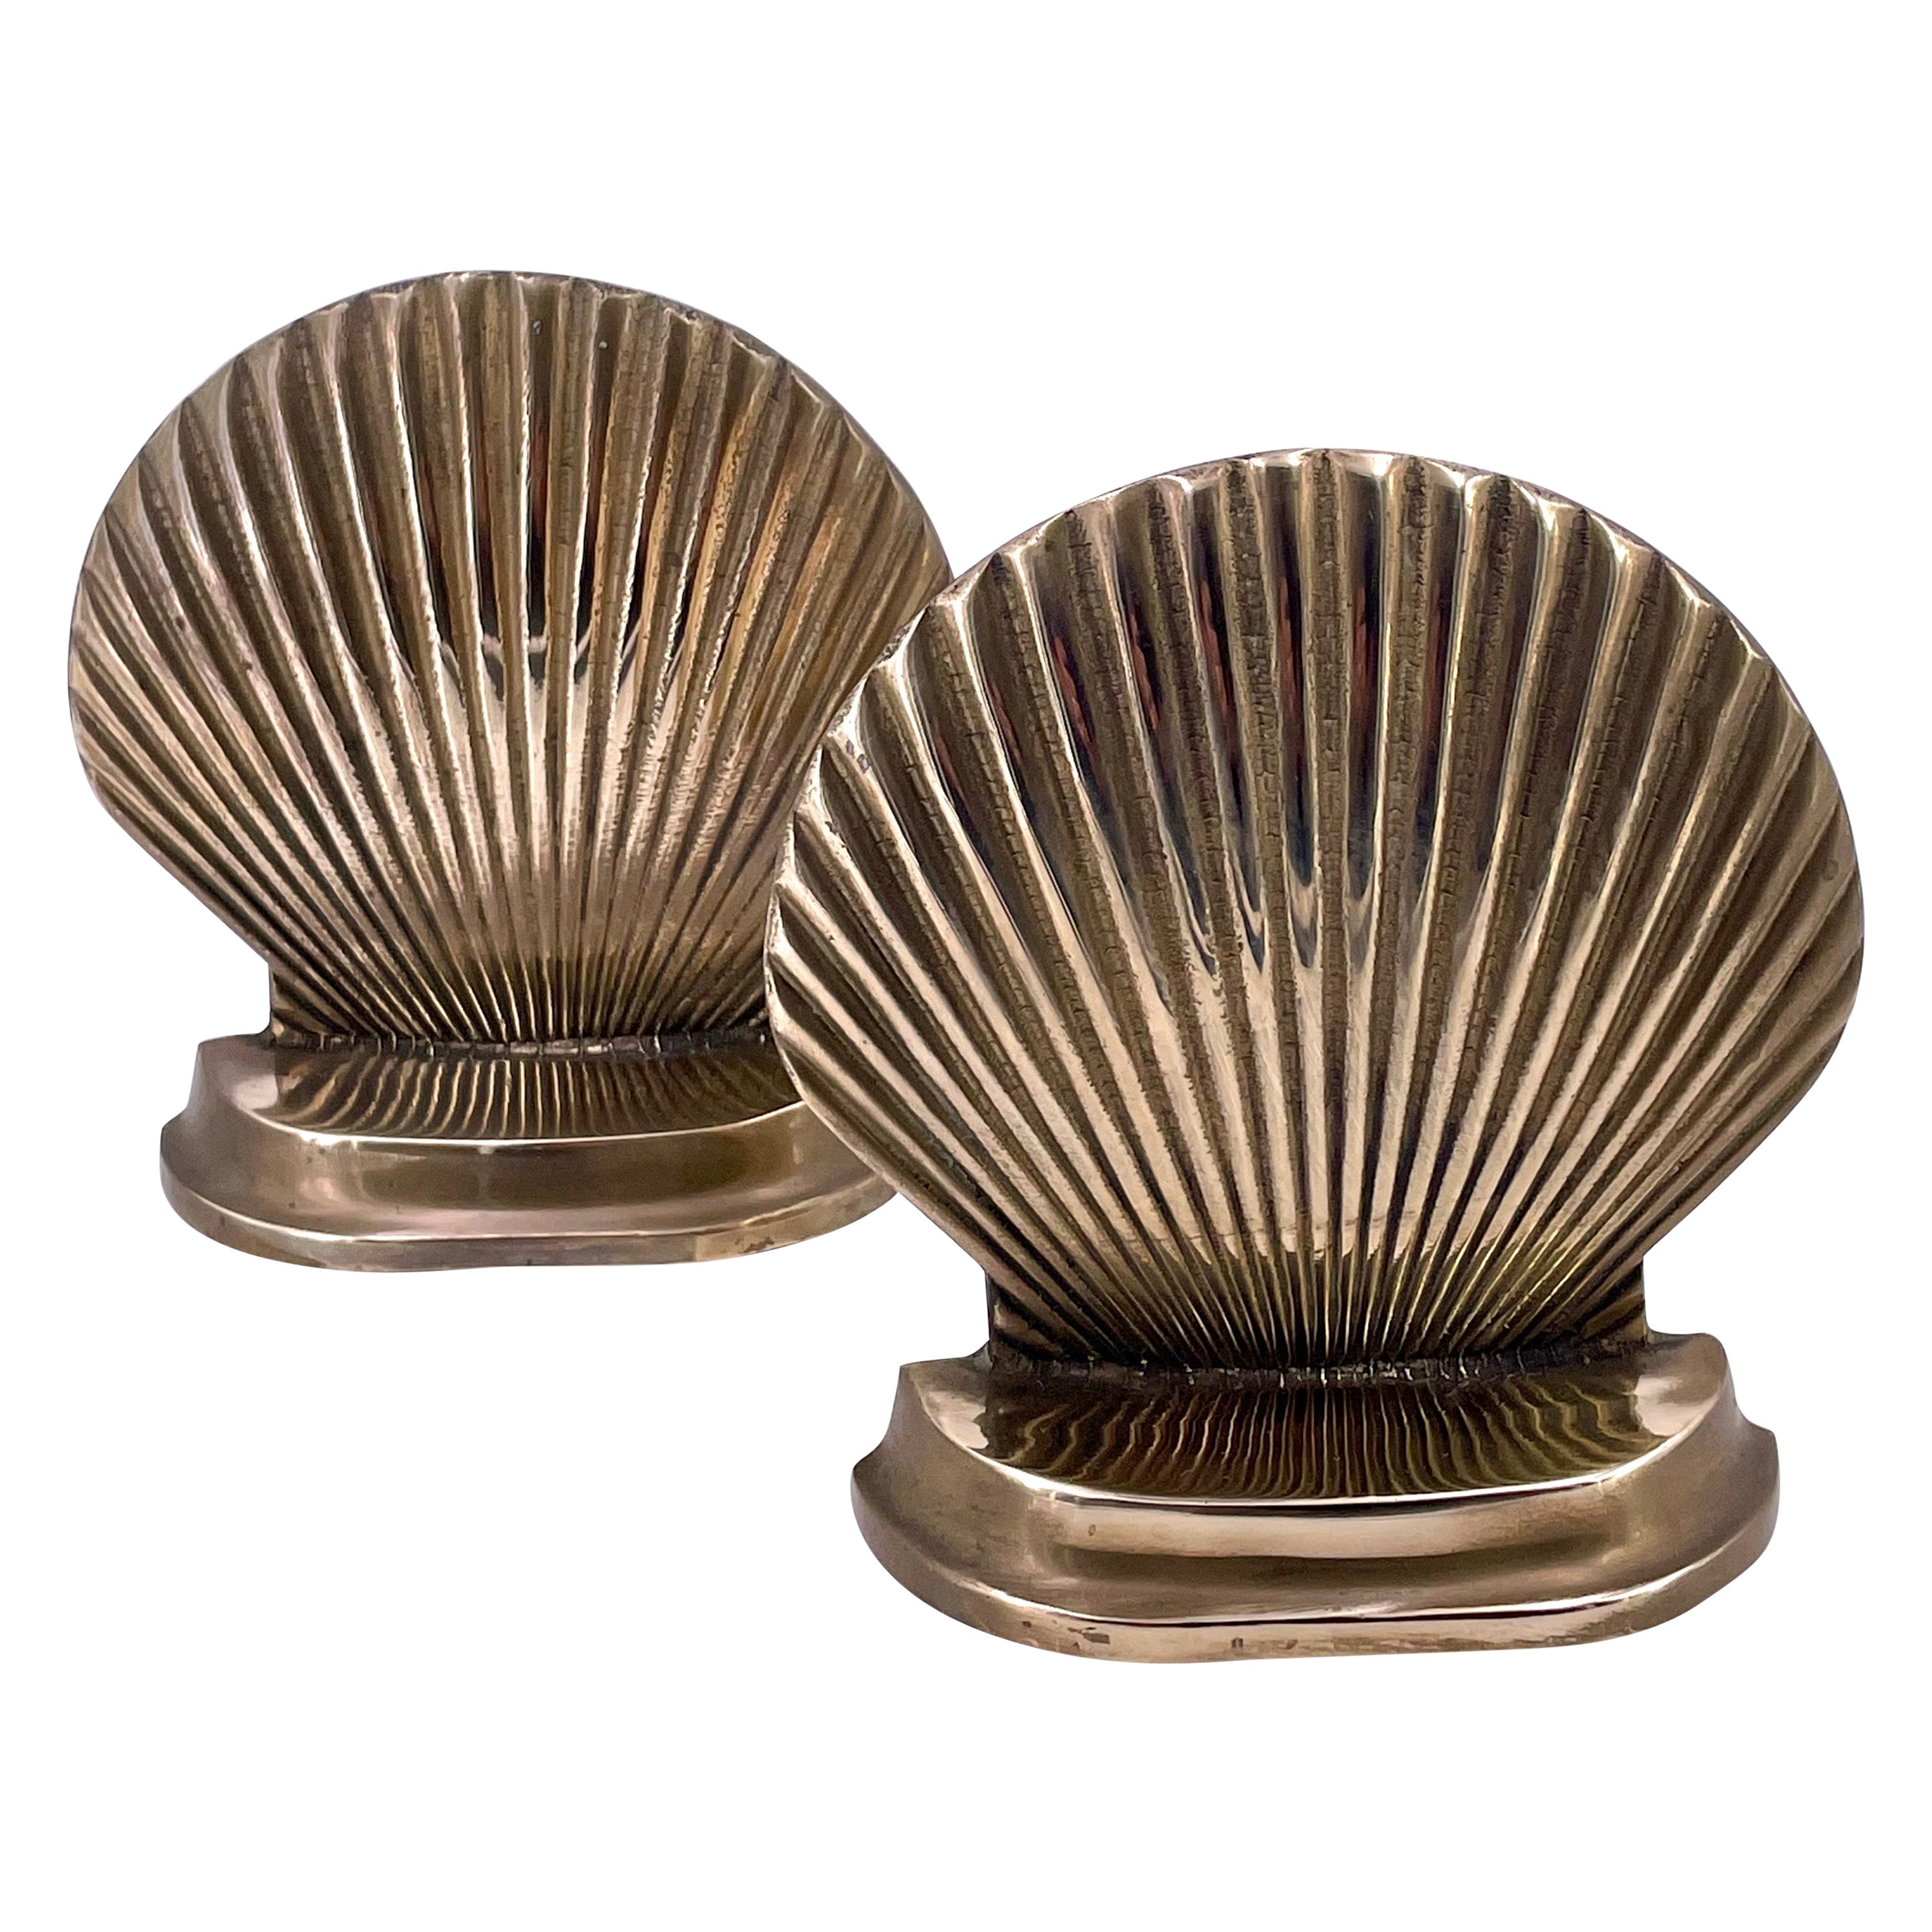 Vintage Hollywood Regency Polished Brass Sea Shell Sculpture Pair of Bookends For Sale